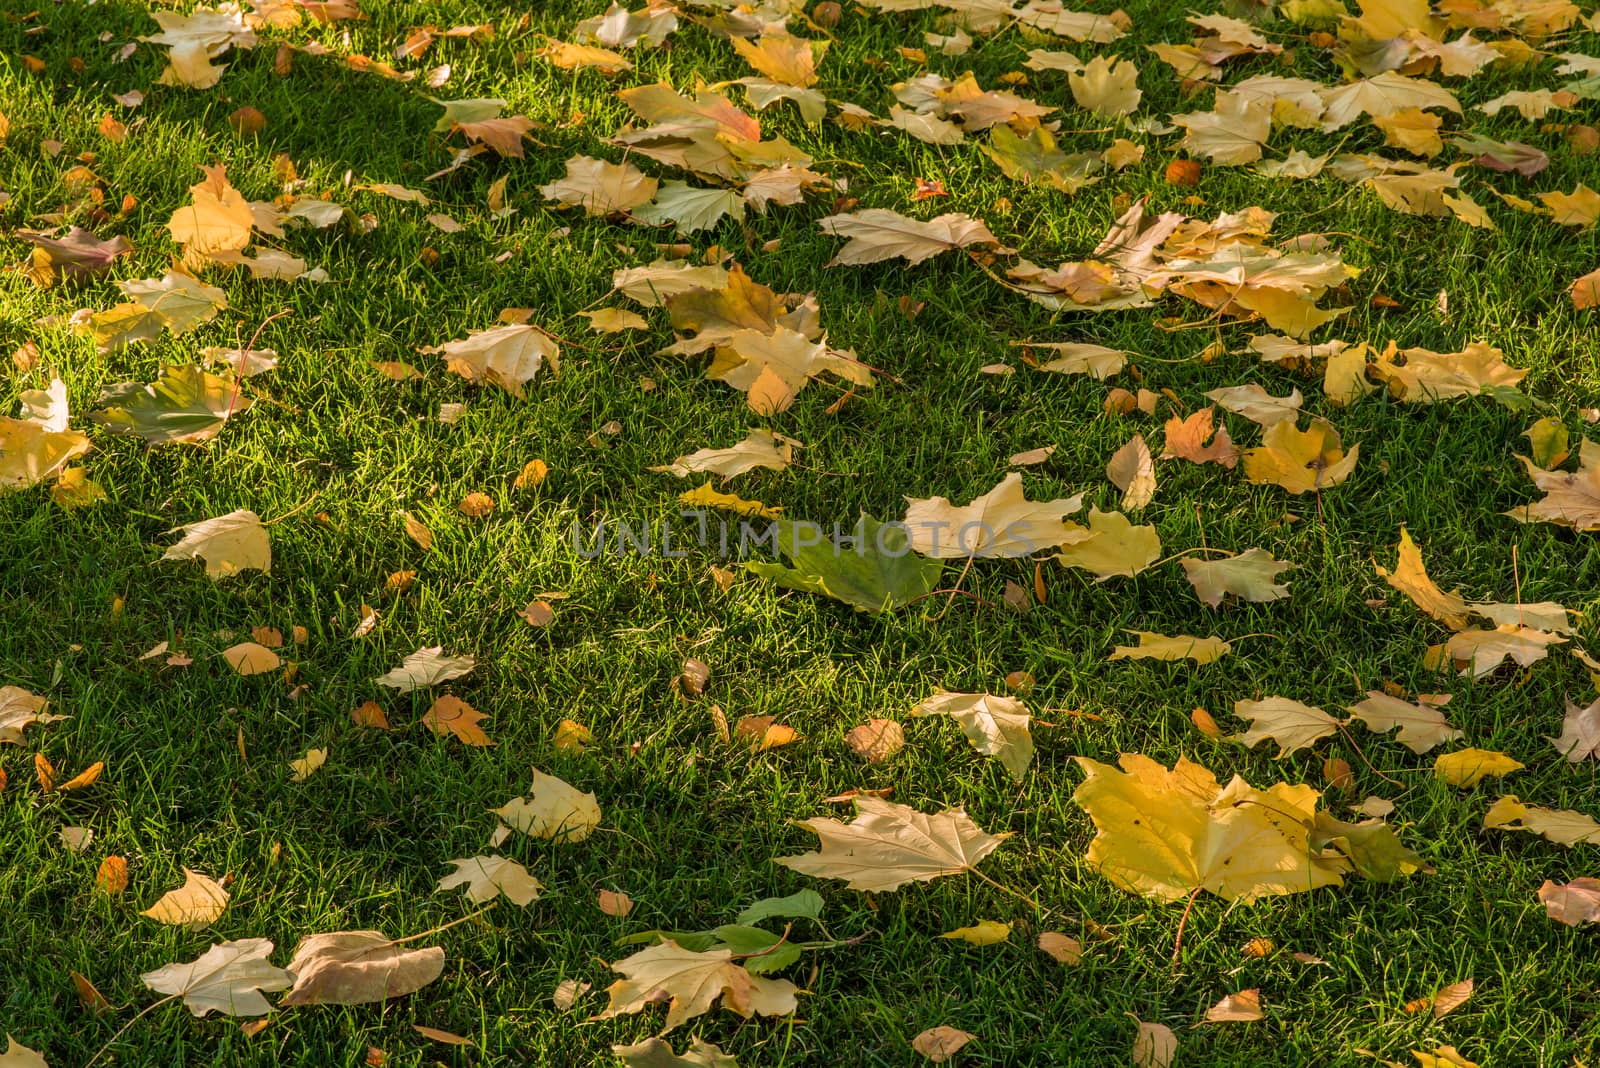 Yellow maple leaves lying on green lawn. Golden leaves on green grass.